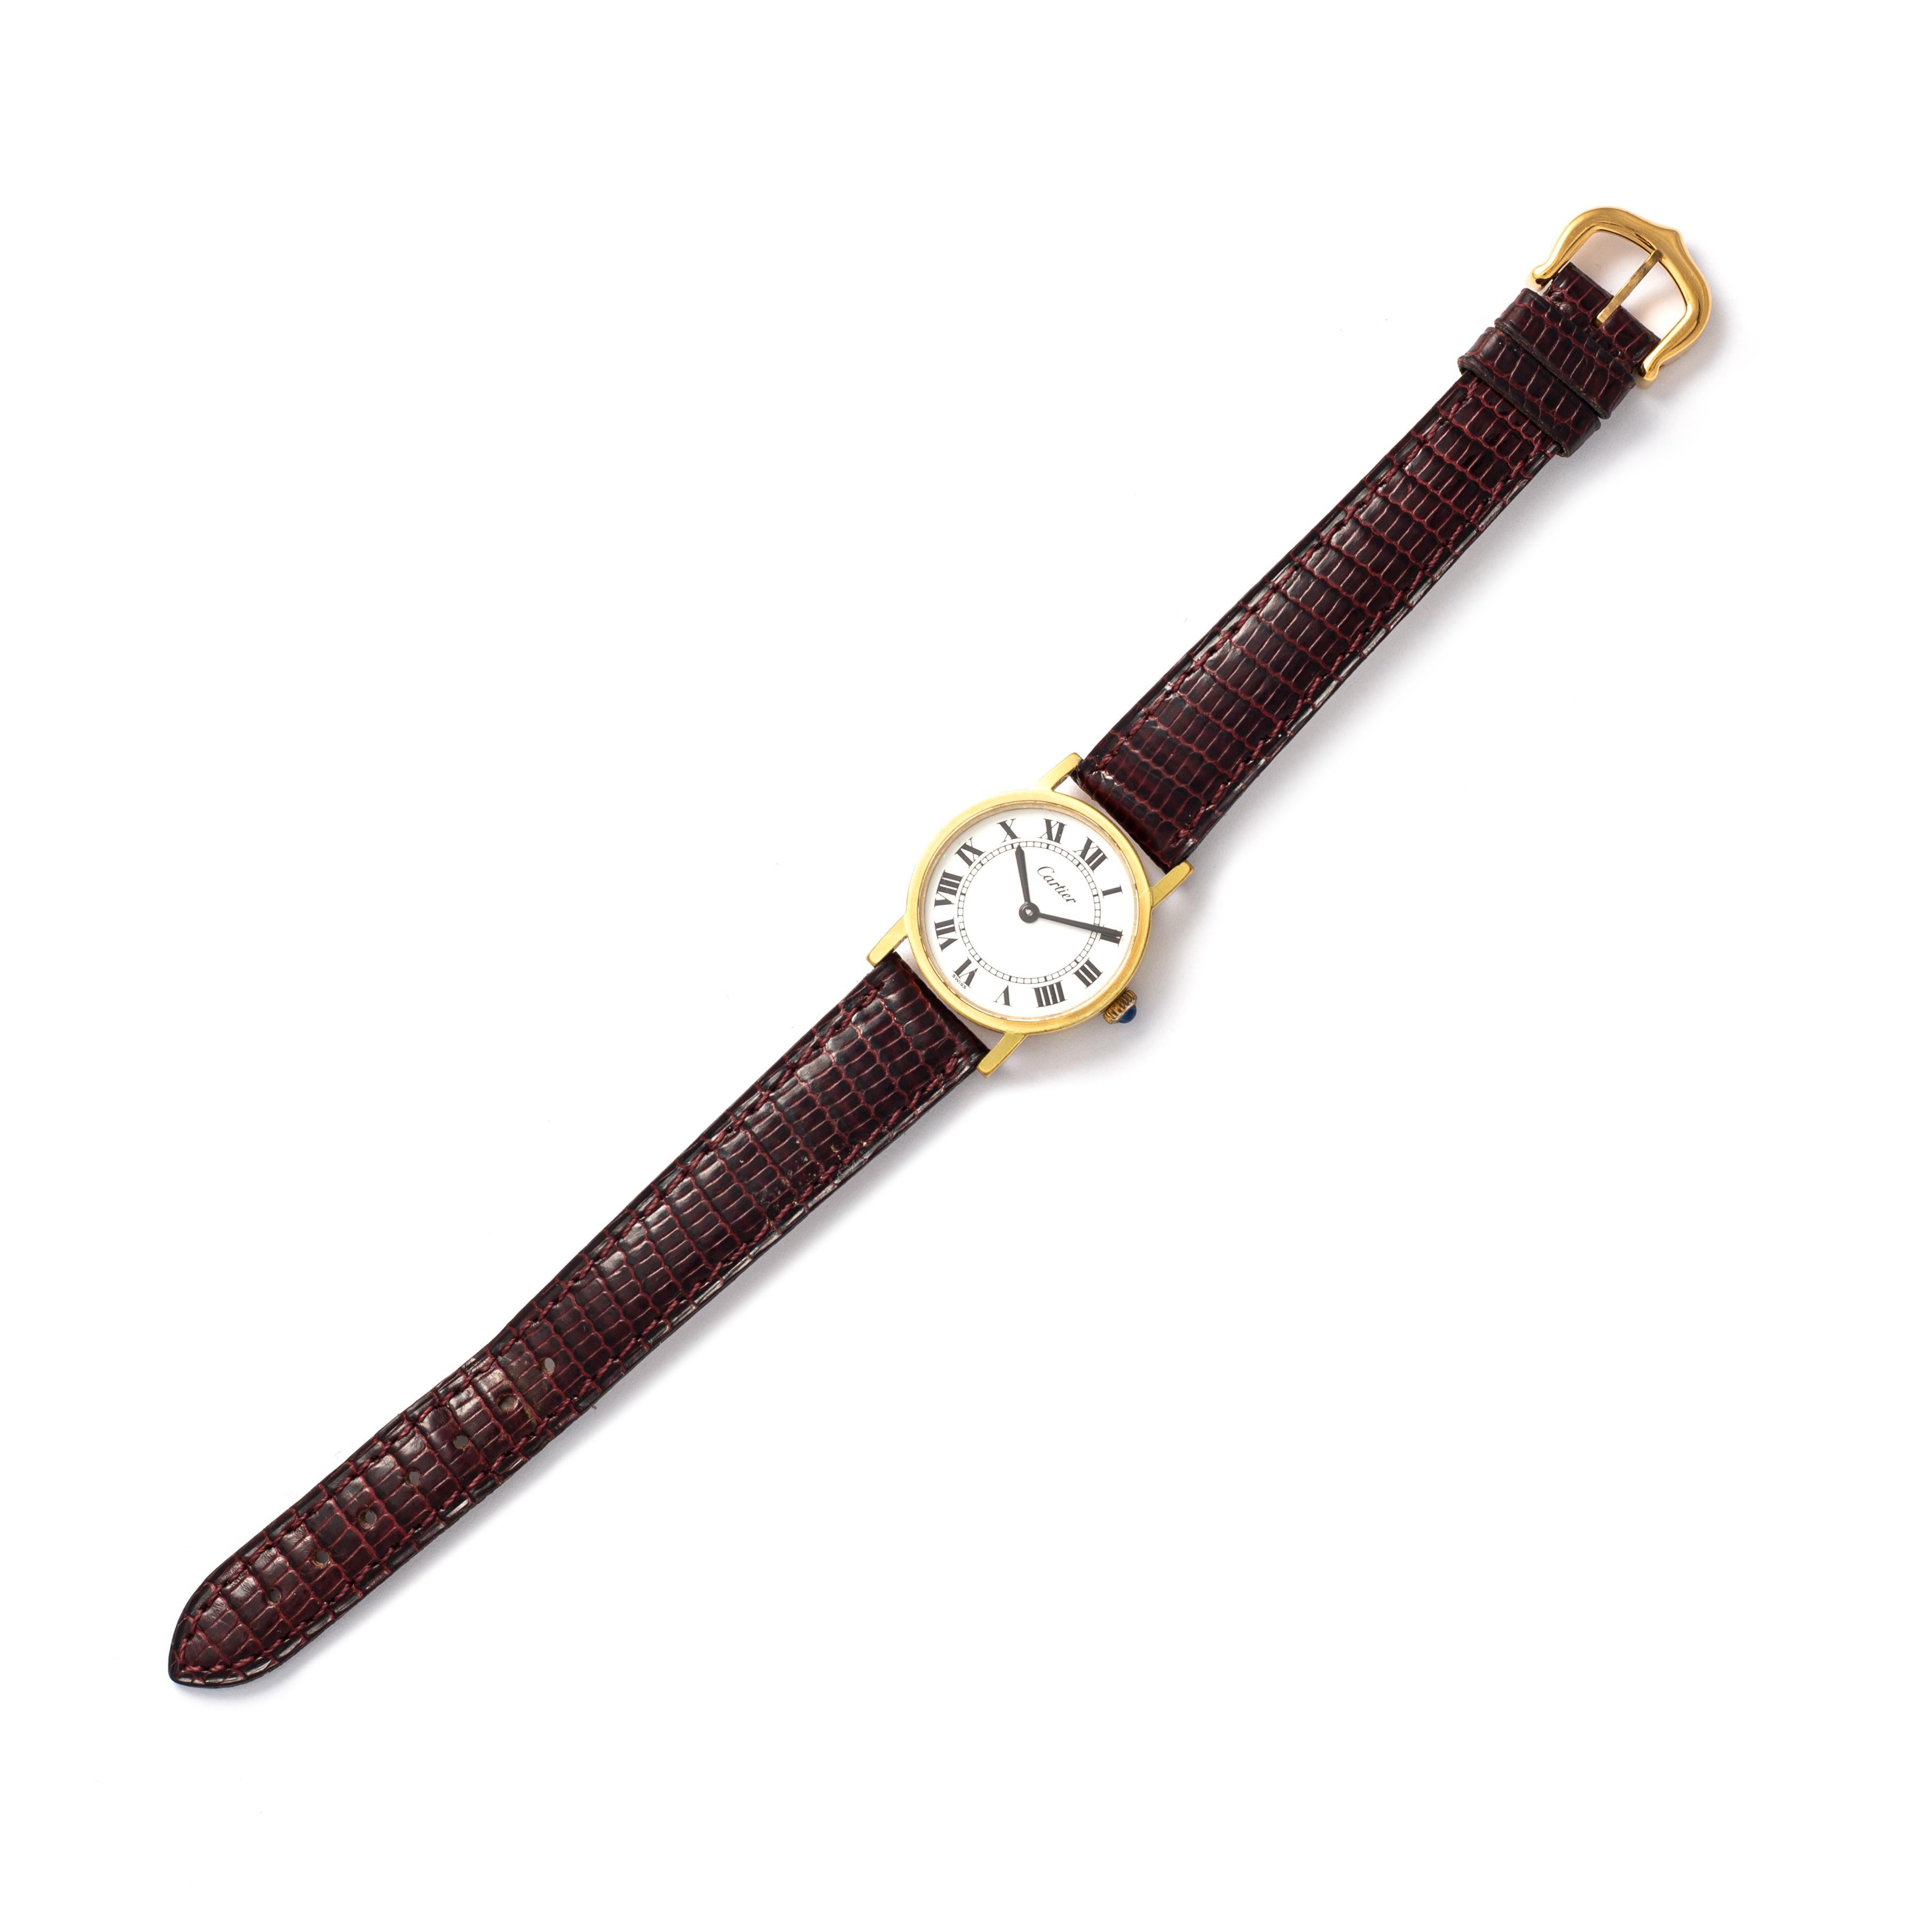 Cartier. Solo collection. Gold-plated metal wristwatch, round shape, white background and Roman numerals.
Bordeaux leather strap and pin buckle. Cabochon-cut sapphire on the winding.
Quartz movement. Signed Cartier. 
Diameter of the dial: 23.00 mm.